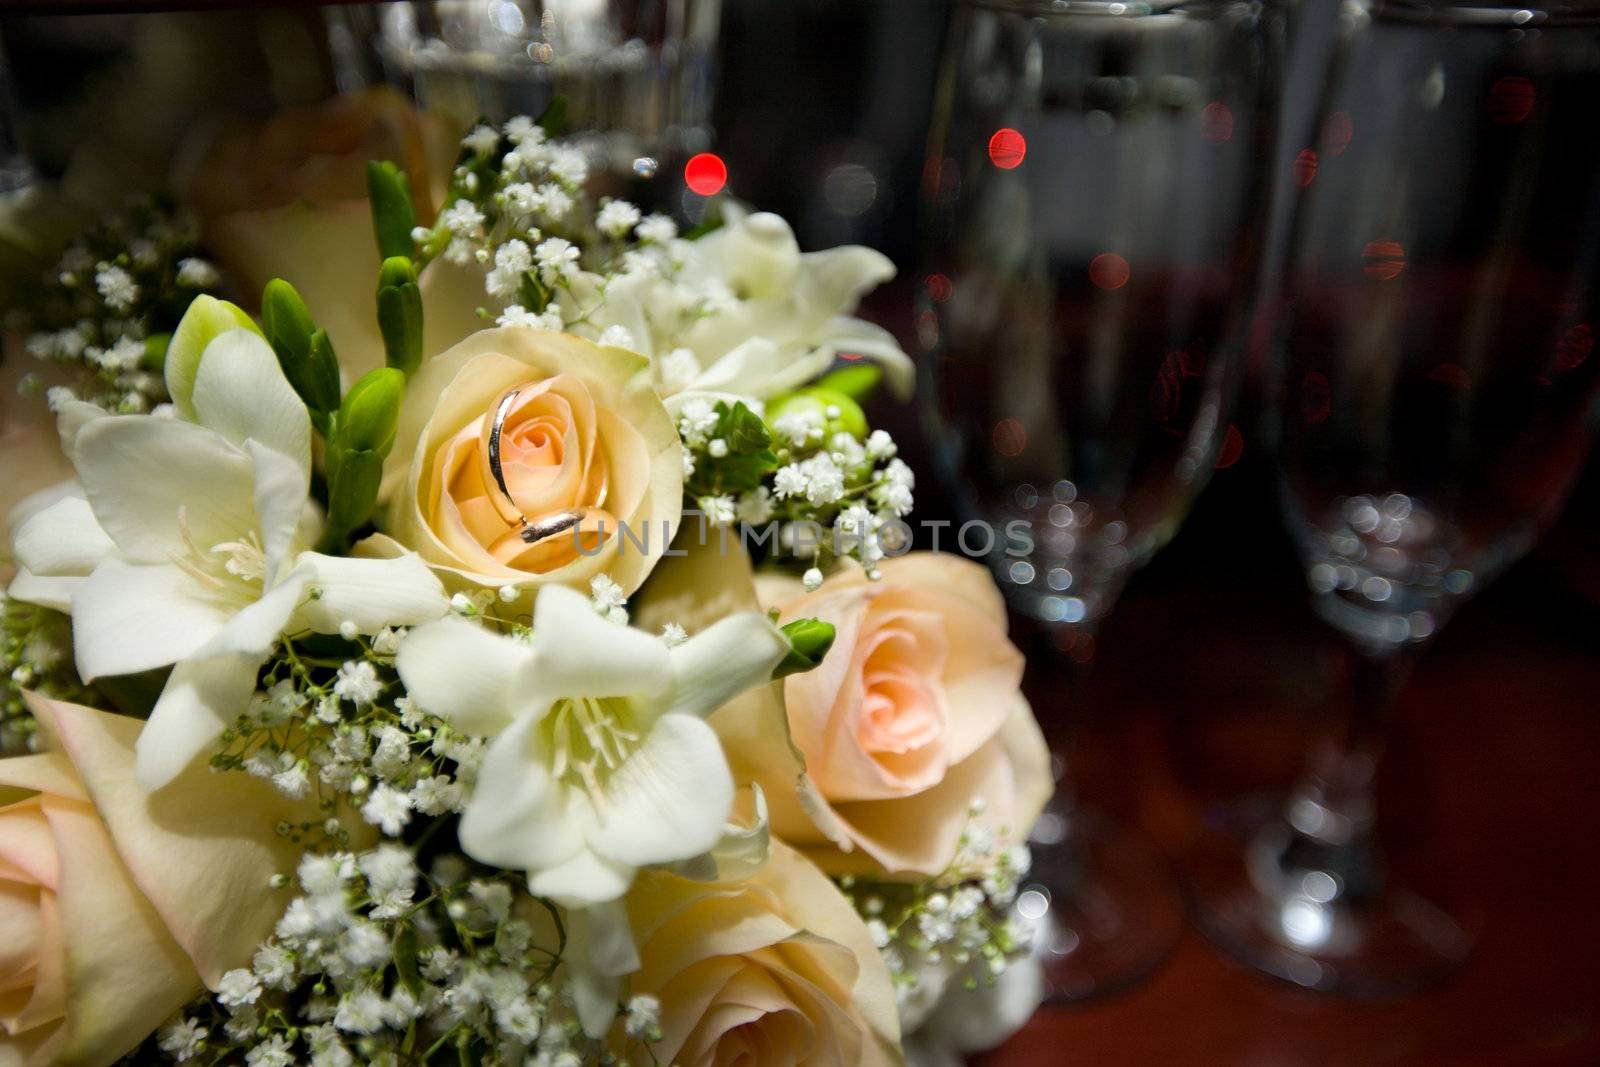 Two wedding rings on bouquet  near glasses